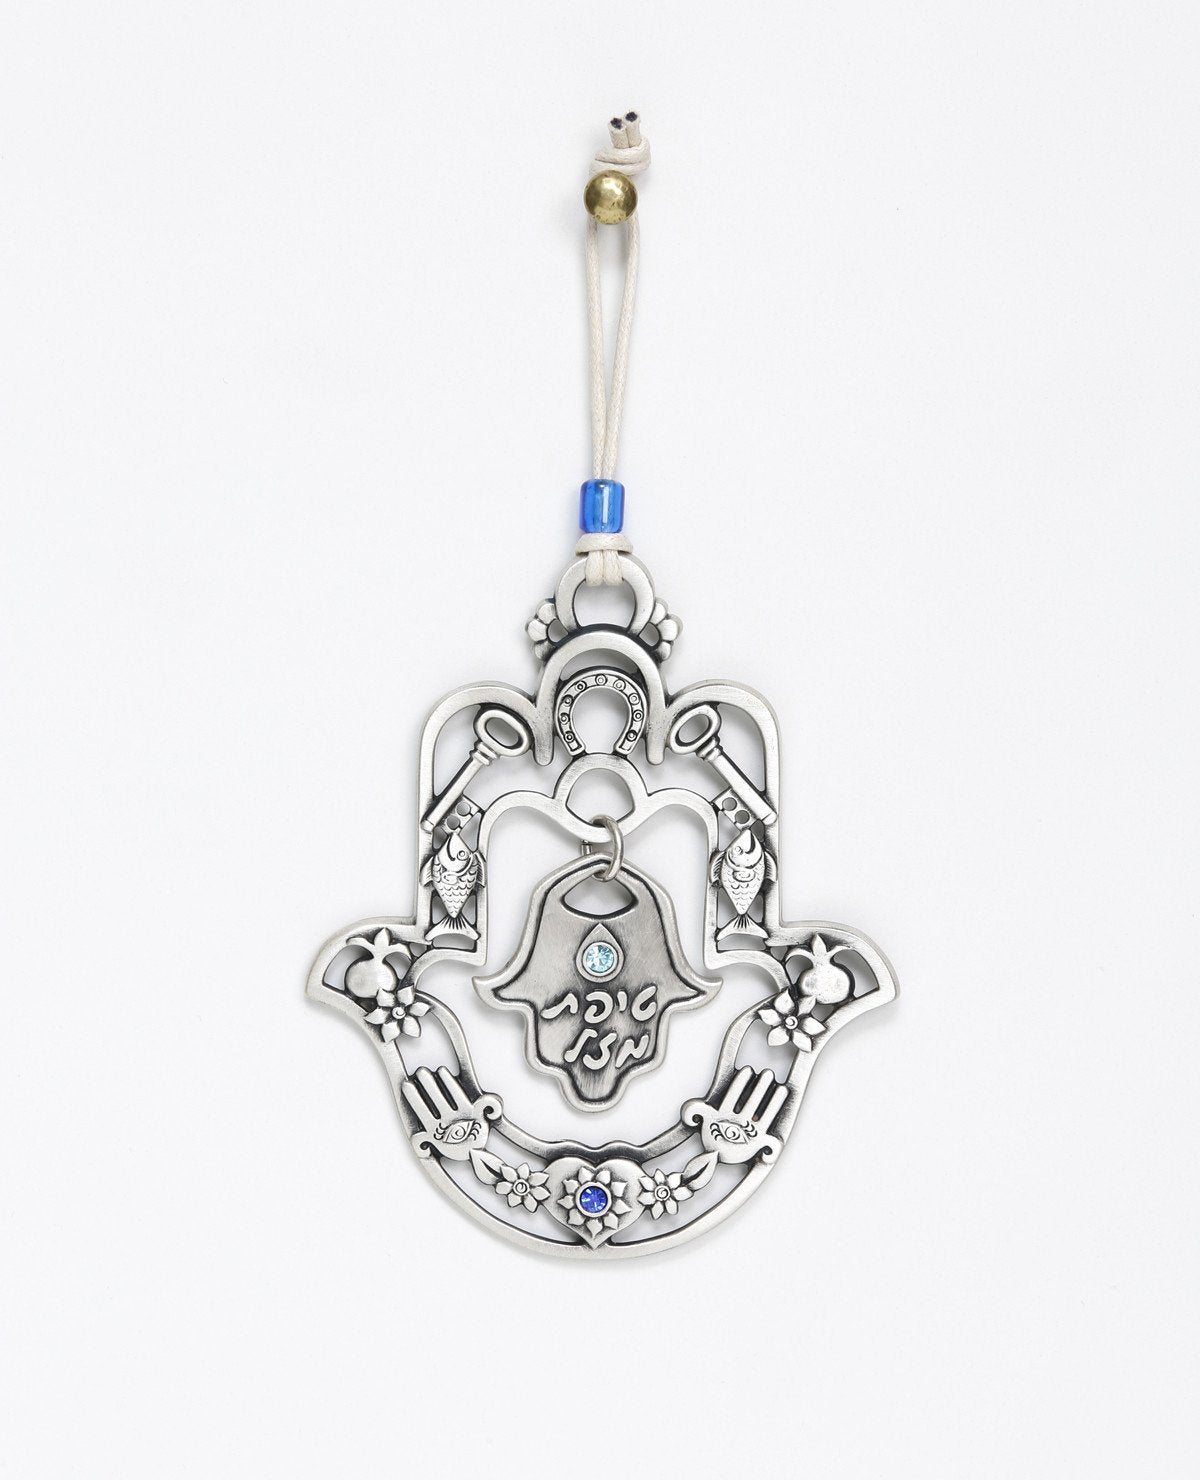 A hanging Hamsa ornament with a delicate filigree like design and a small Hamsa hanging from its center with the words "Drop of Luck". The Hamsa is decorated at its edges with pairs of motifs from the world of good luck charms and blessings, among them a pomegranate, a flower, a fish and a key. All these face each other to multiply the strength of the blessing. The ornament is coated in sterling silver and embedded with blue colored Swarovski crystals. Comes with a natural colored faux leather string, decor